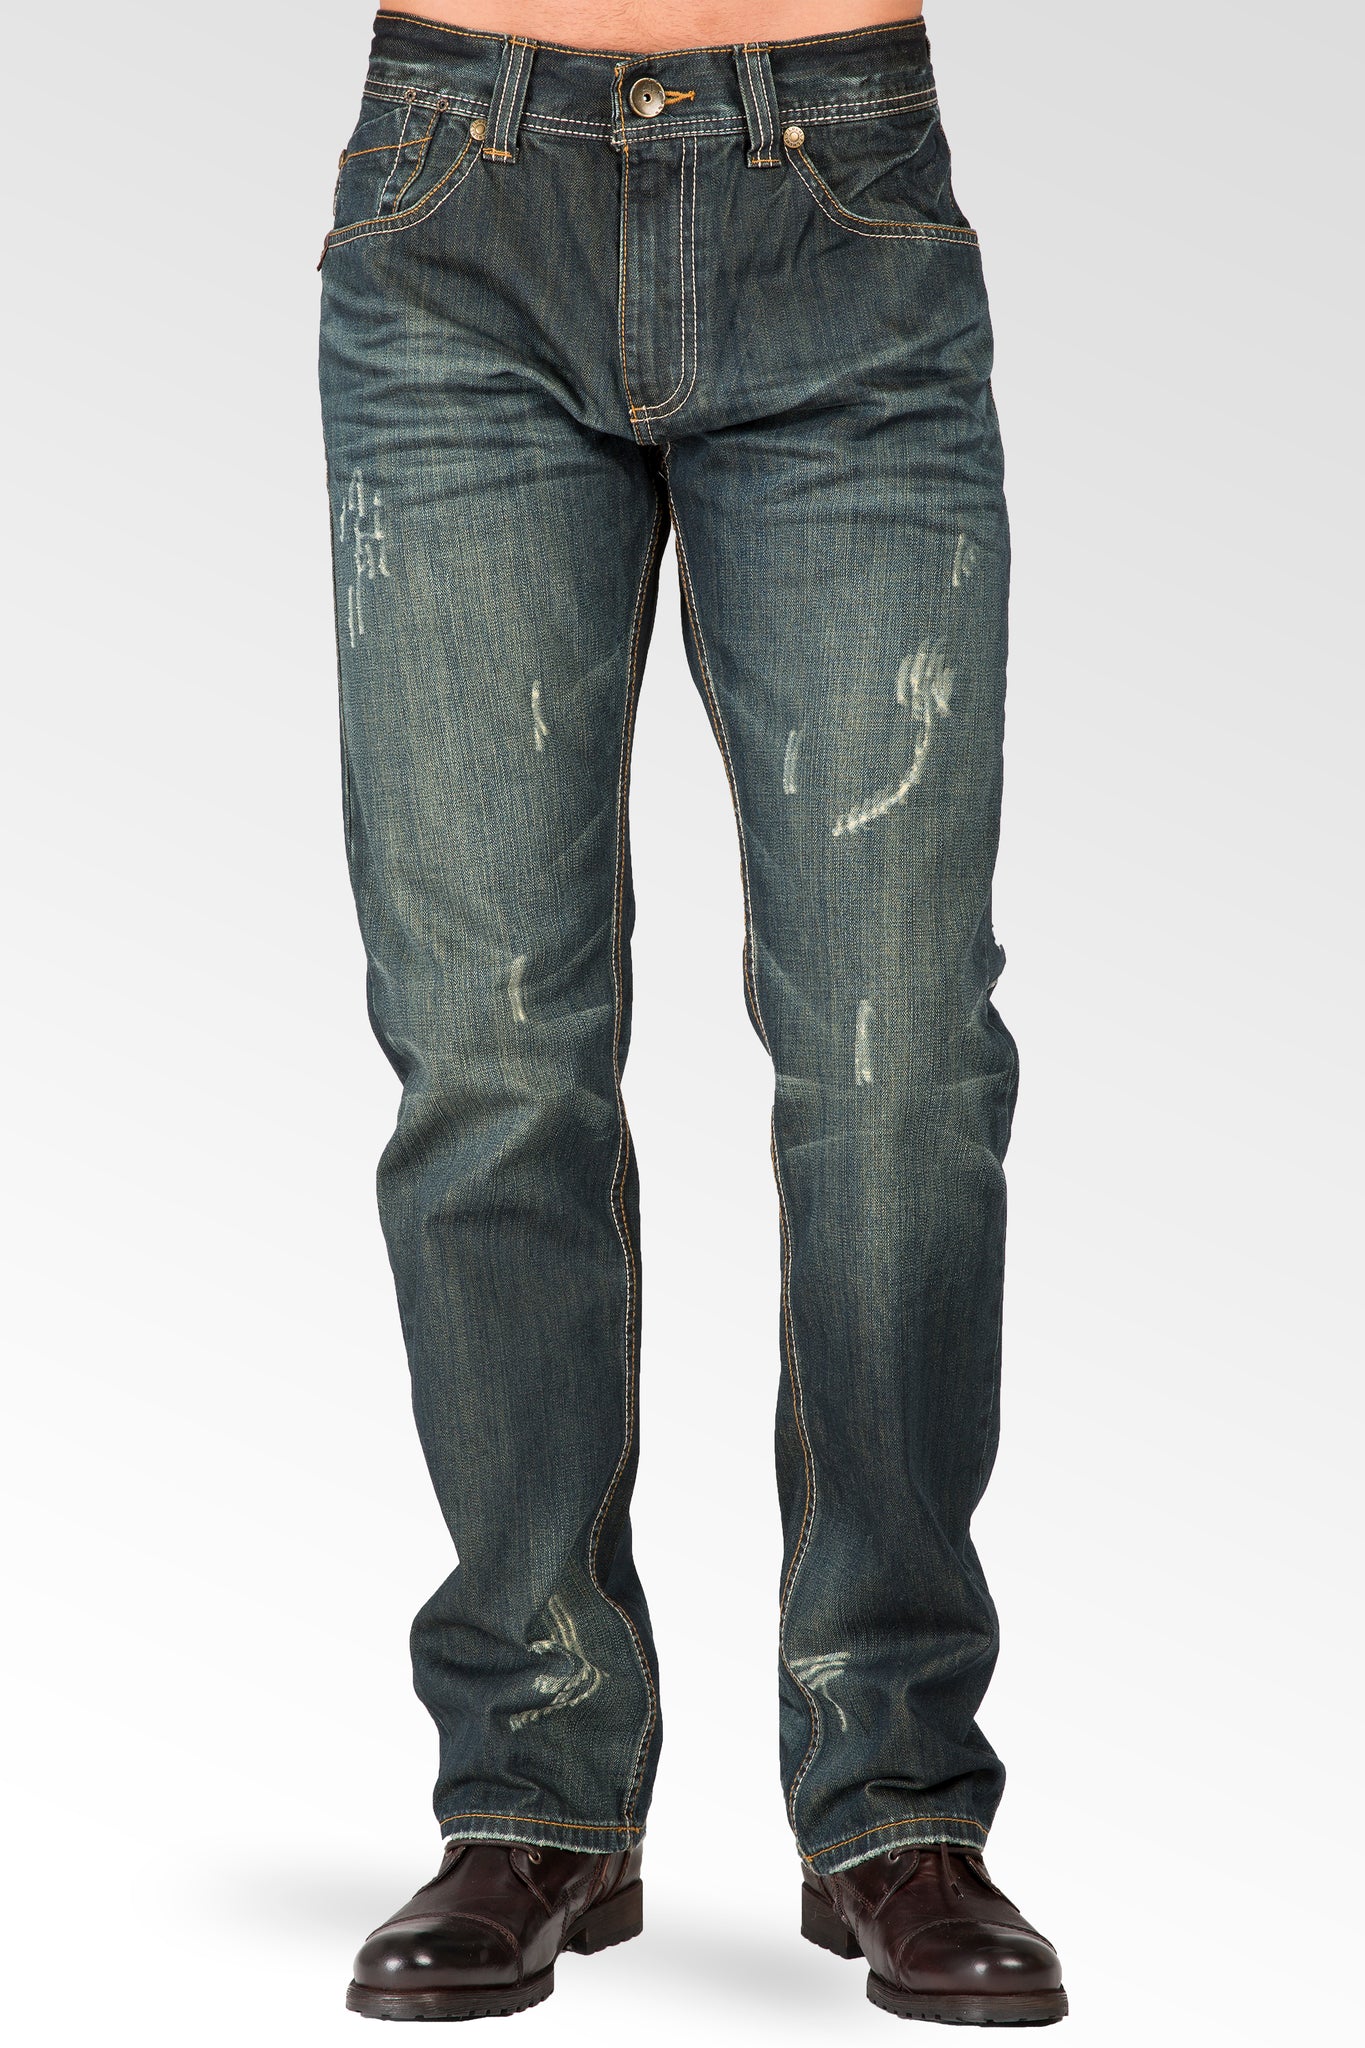 Relaxed Straight Ripped Faded Vintage Premium Denim Signature 5 Pocket Jeans Wrinkle Whisker